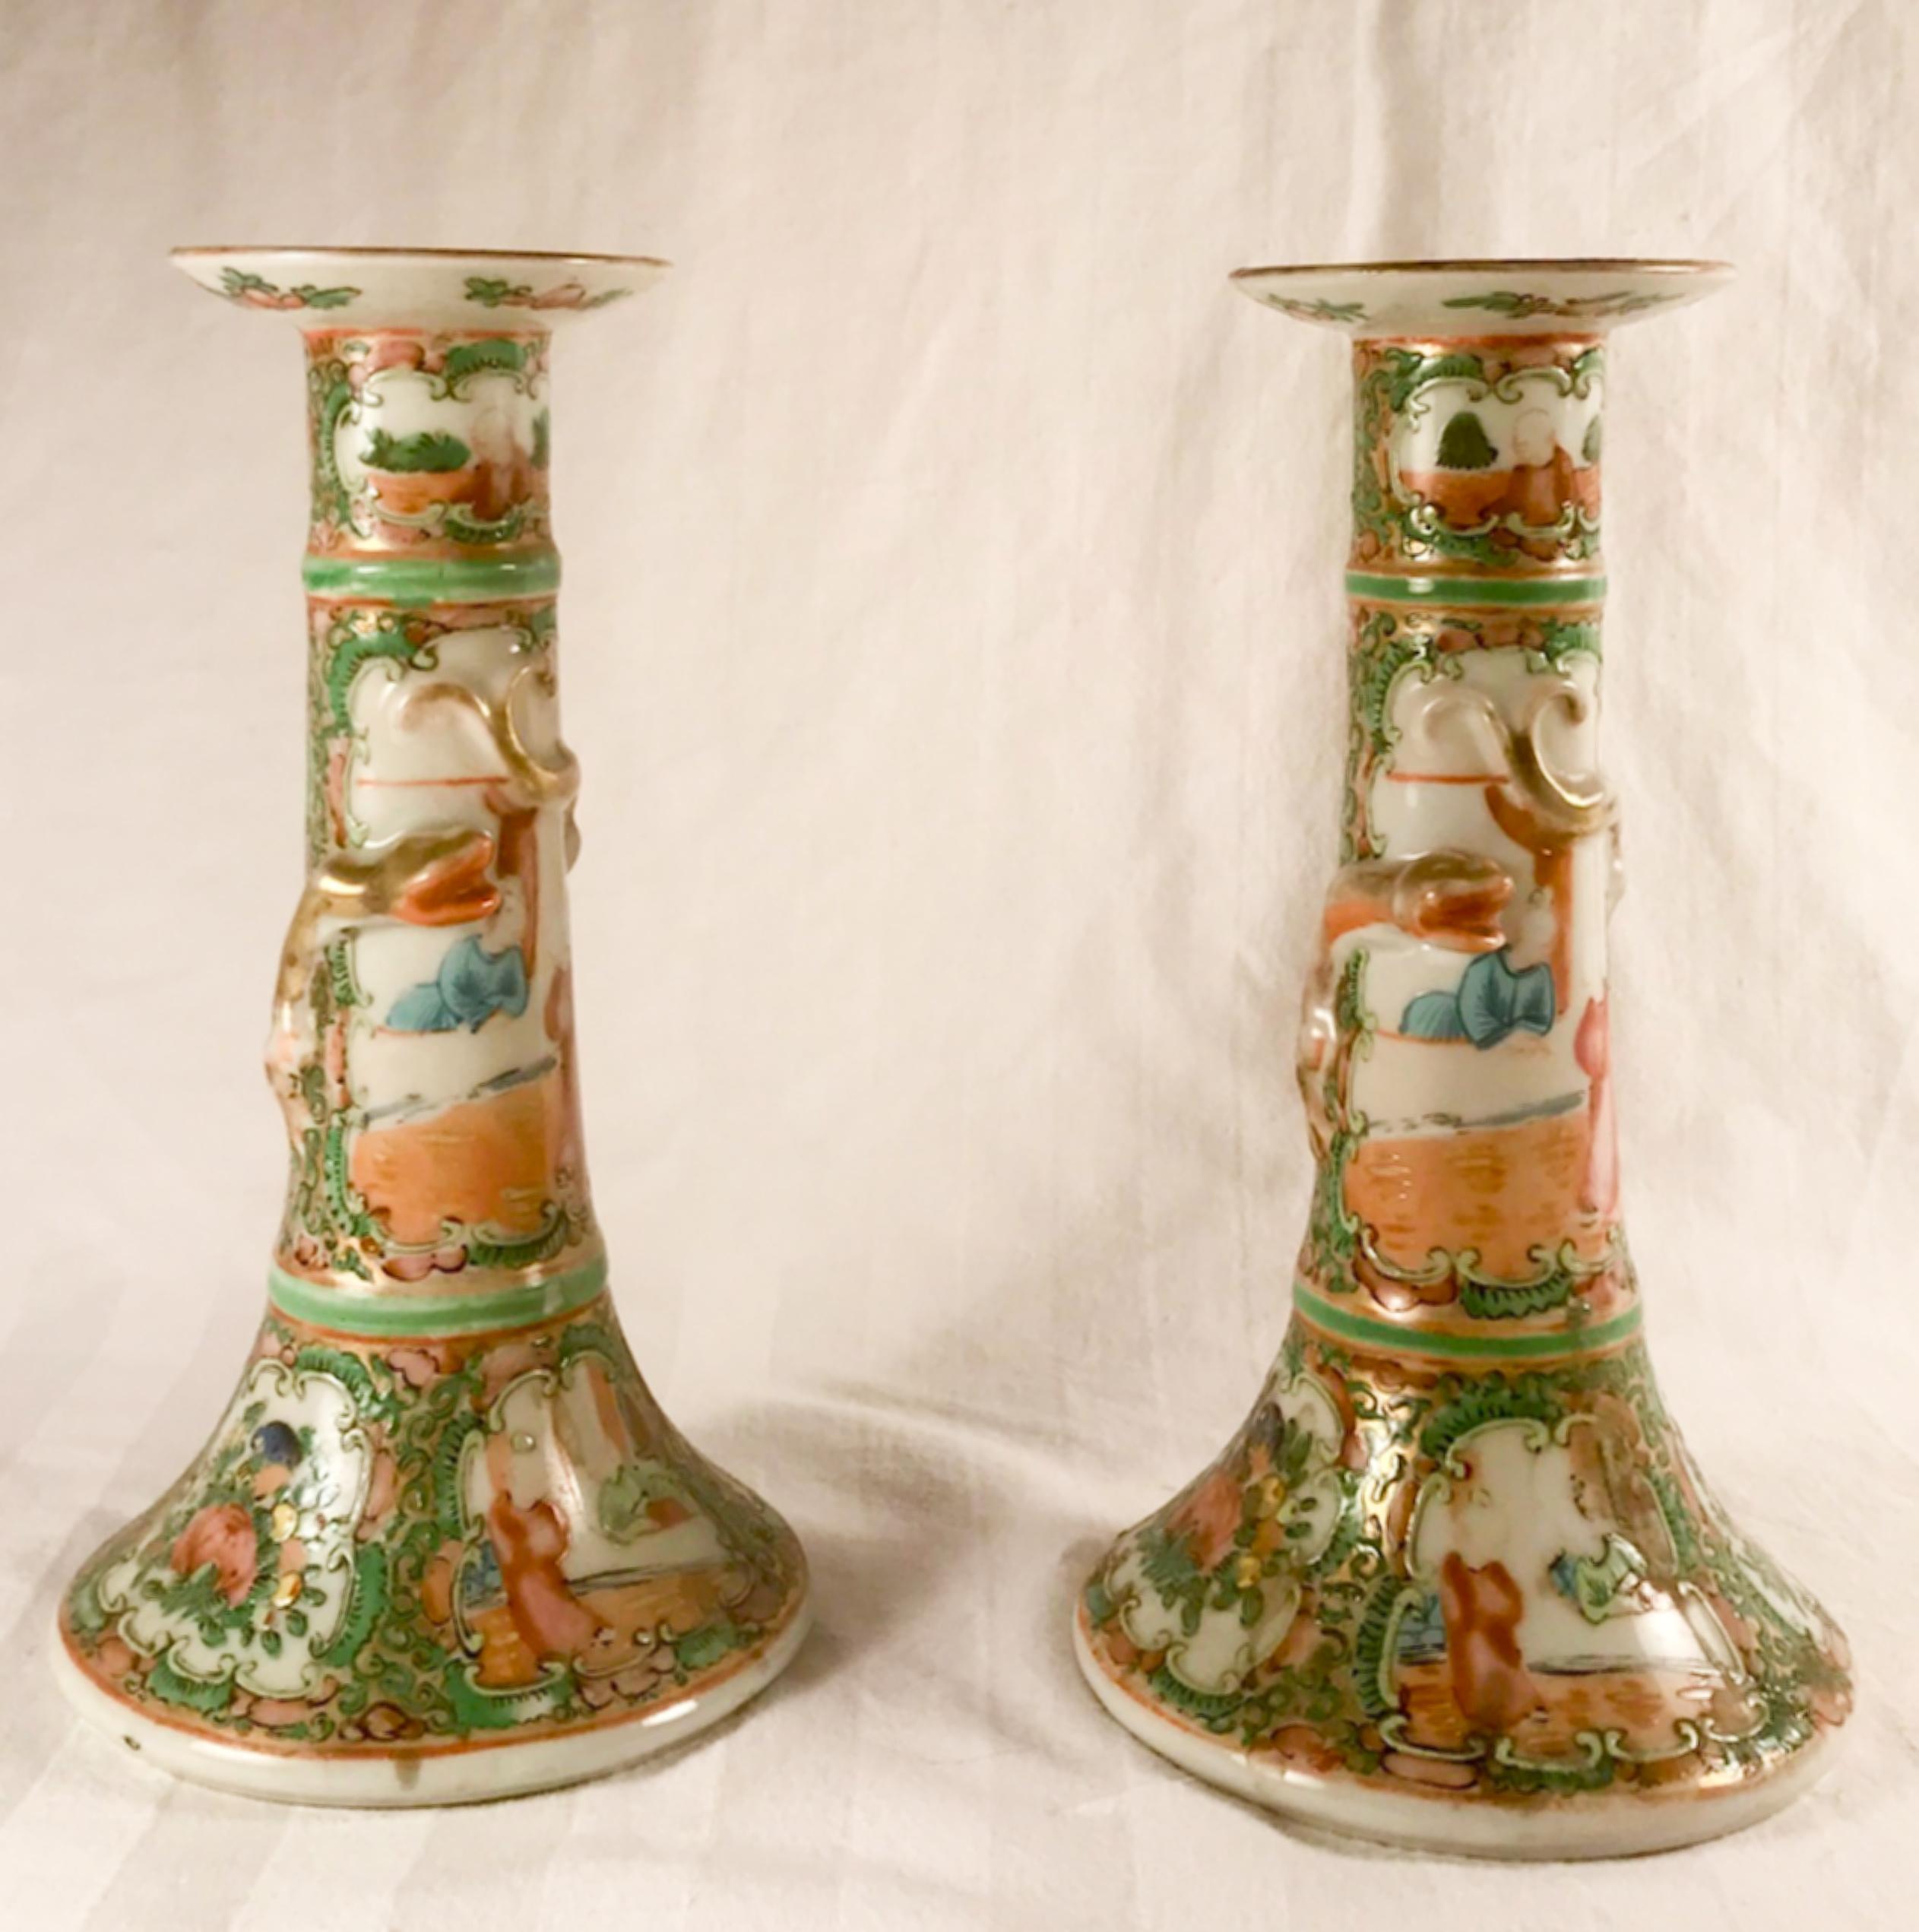 Rare pair of Chinese export rose medallion pattern porcelain candlesticks, 19th century
Pair of Chinese export rose medallion pattern porcelain candlesticks, late 19th century, with gilt modeled kylin encircling the shafts. A kylin is a unicorn of